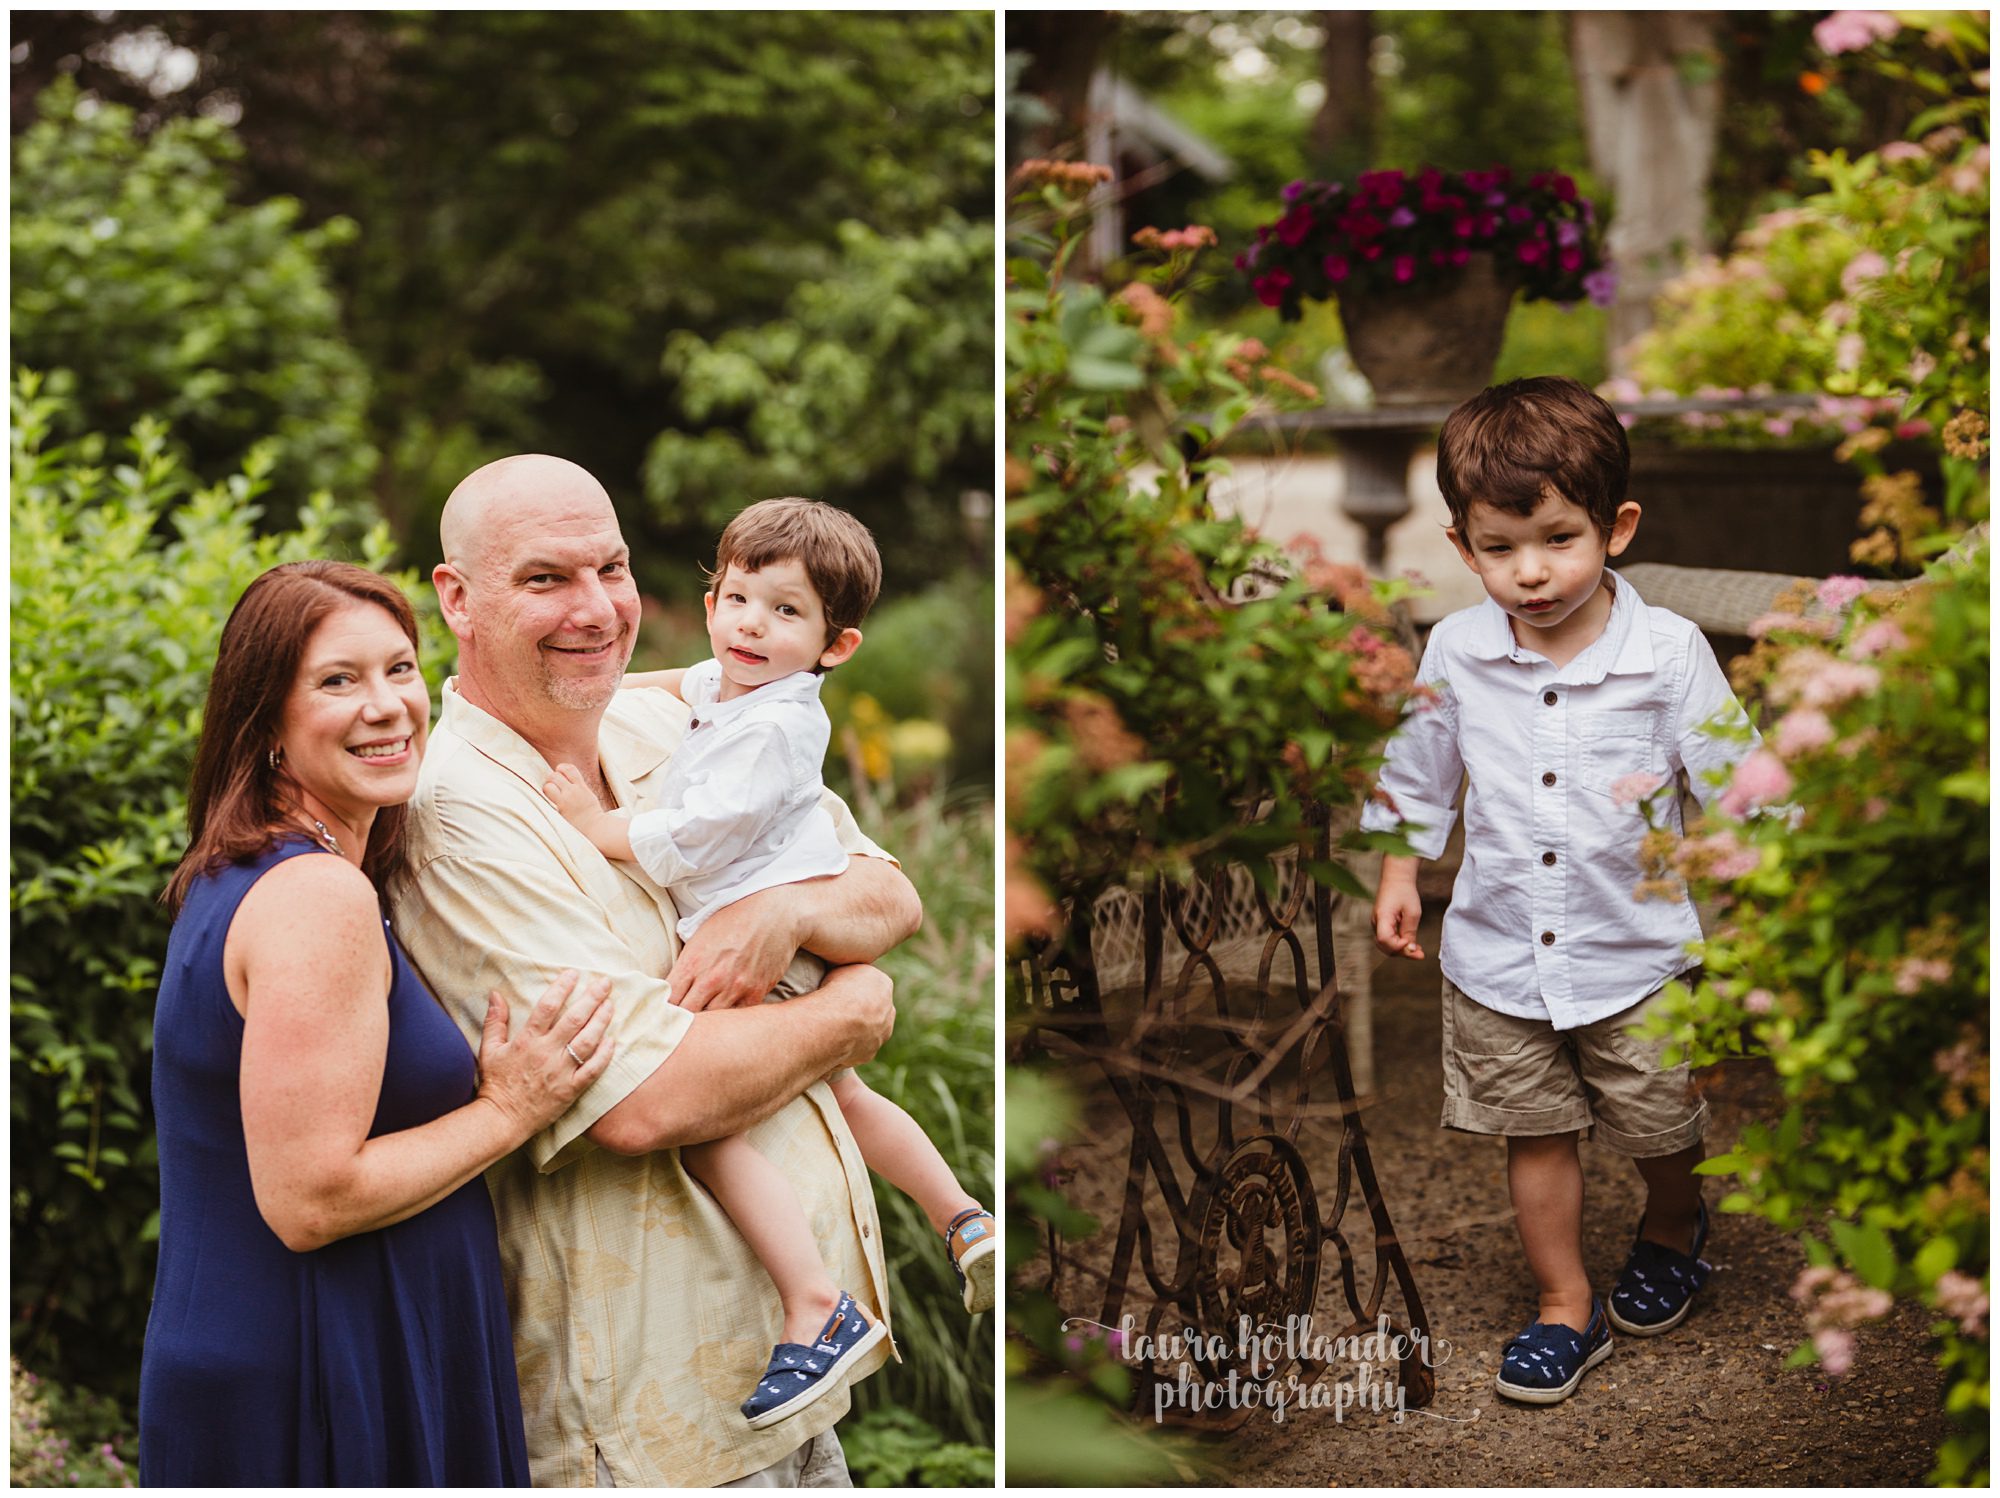 two year milestone session at Southern Exposure in Battle Creek, MI with Laura Hollander Photography